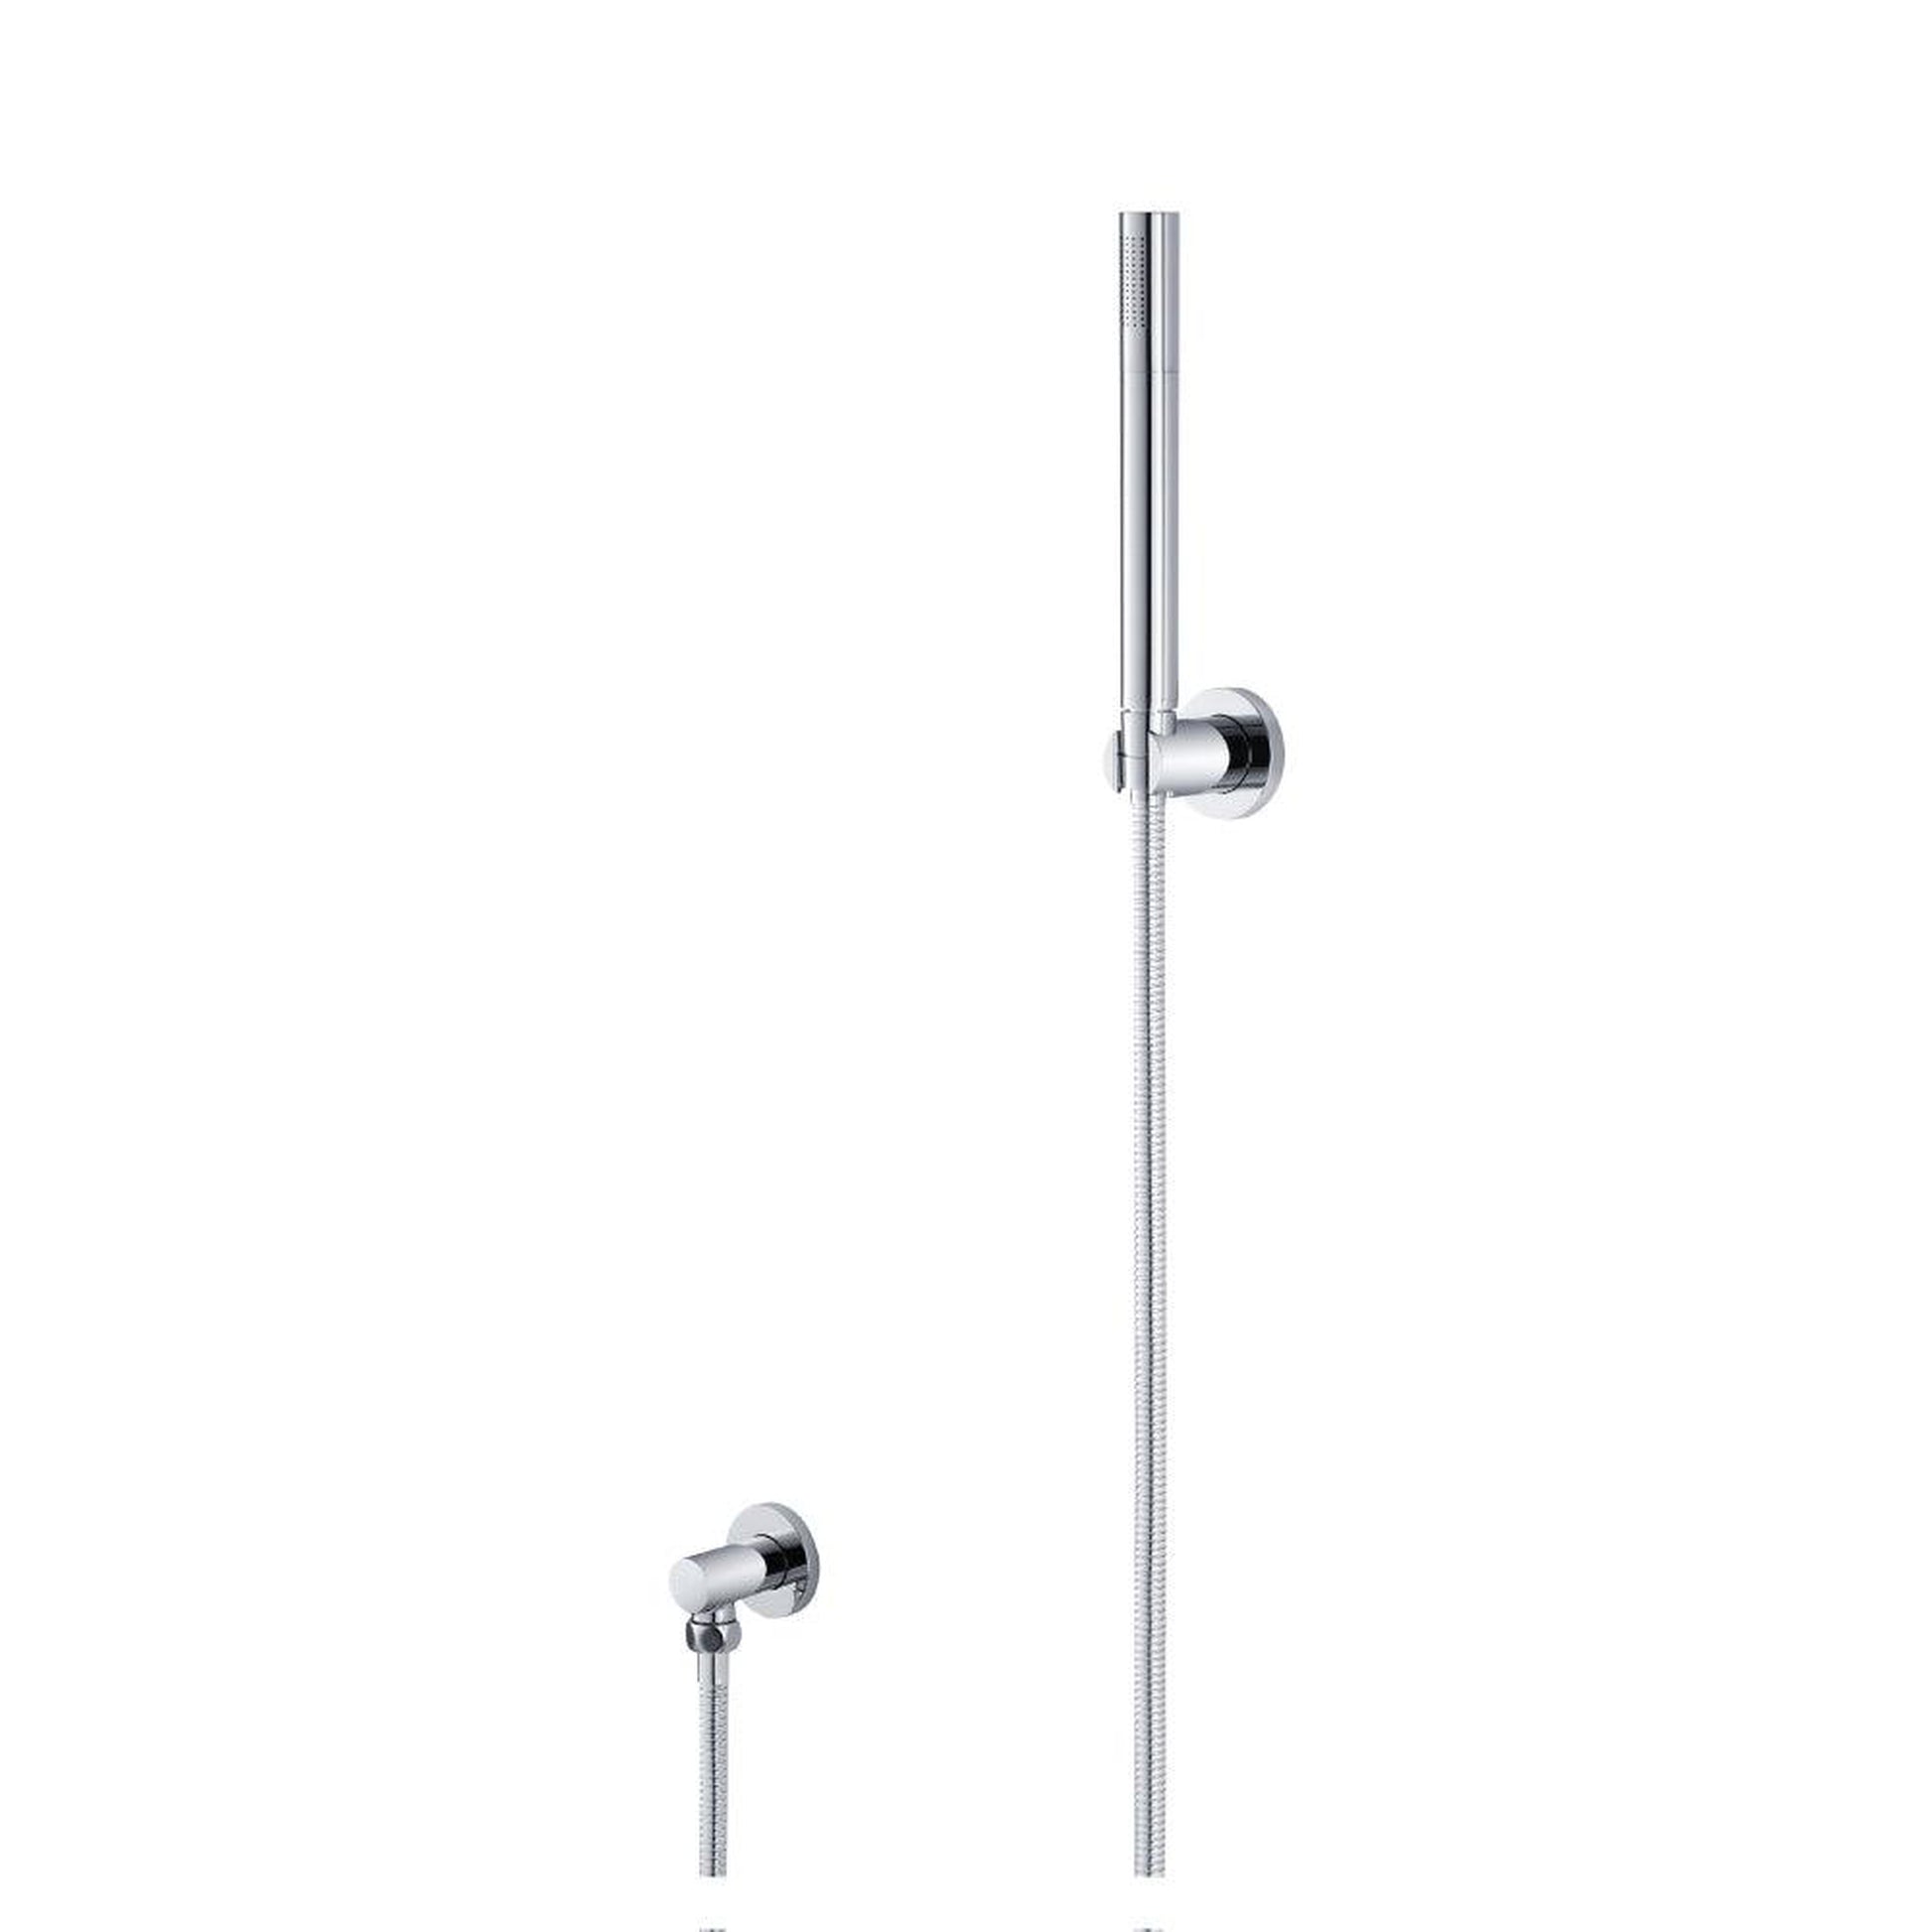 Isenberg Universal Fixtures Hand Shower Set With Wall Elbow, Holder and Hose in Matte Black (HS1004MB)